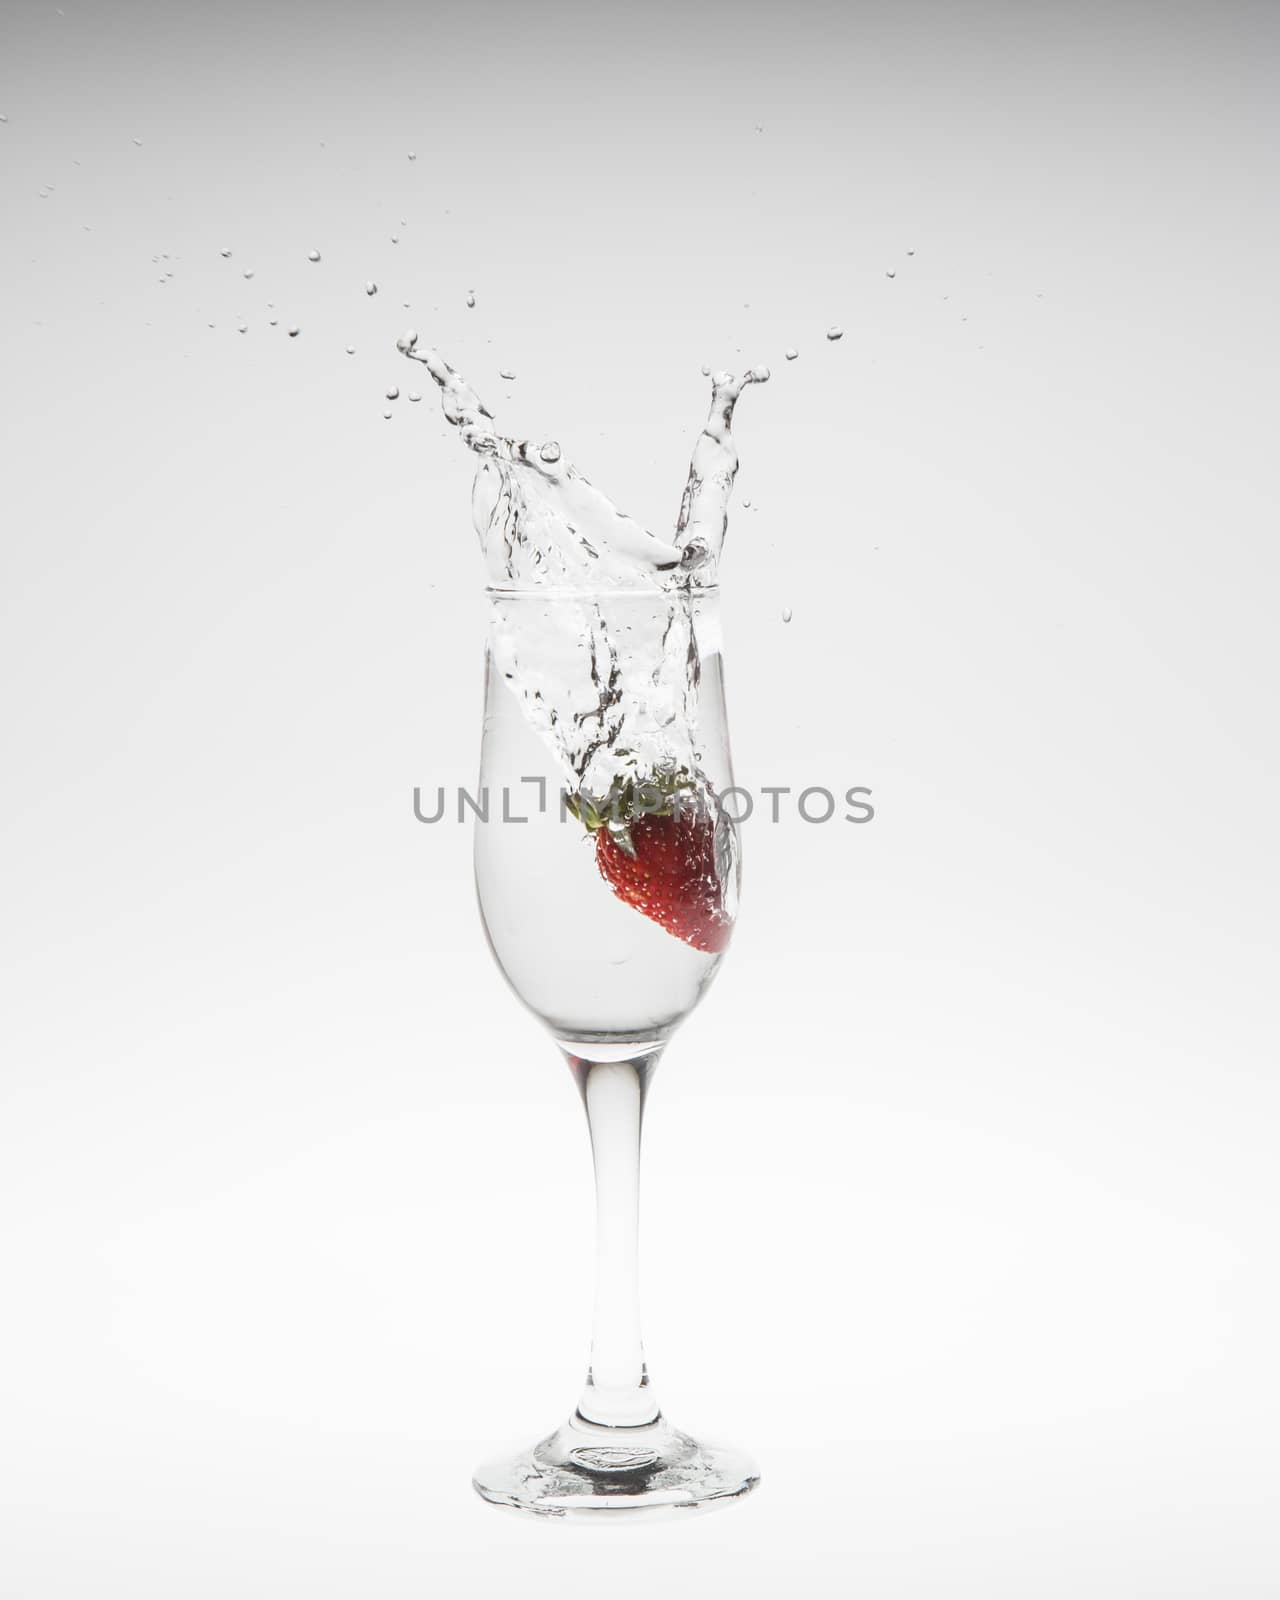 Strawberry falls deeply under water with a splash by Chattranusorn09